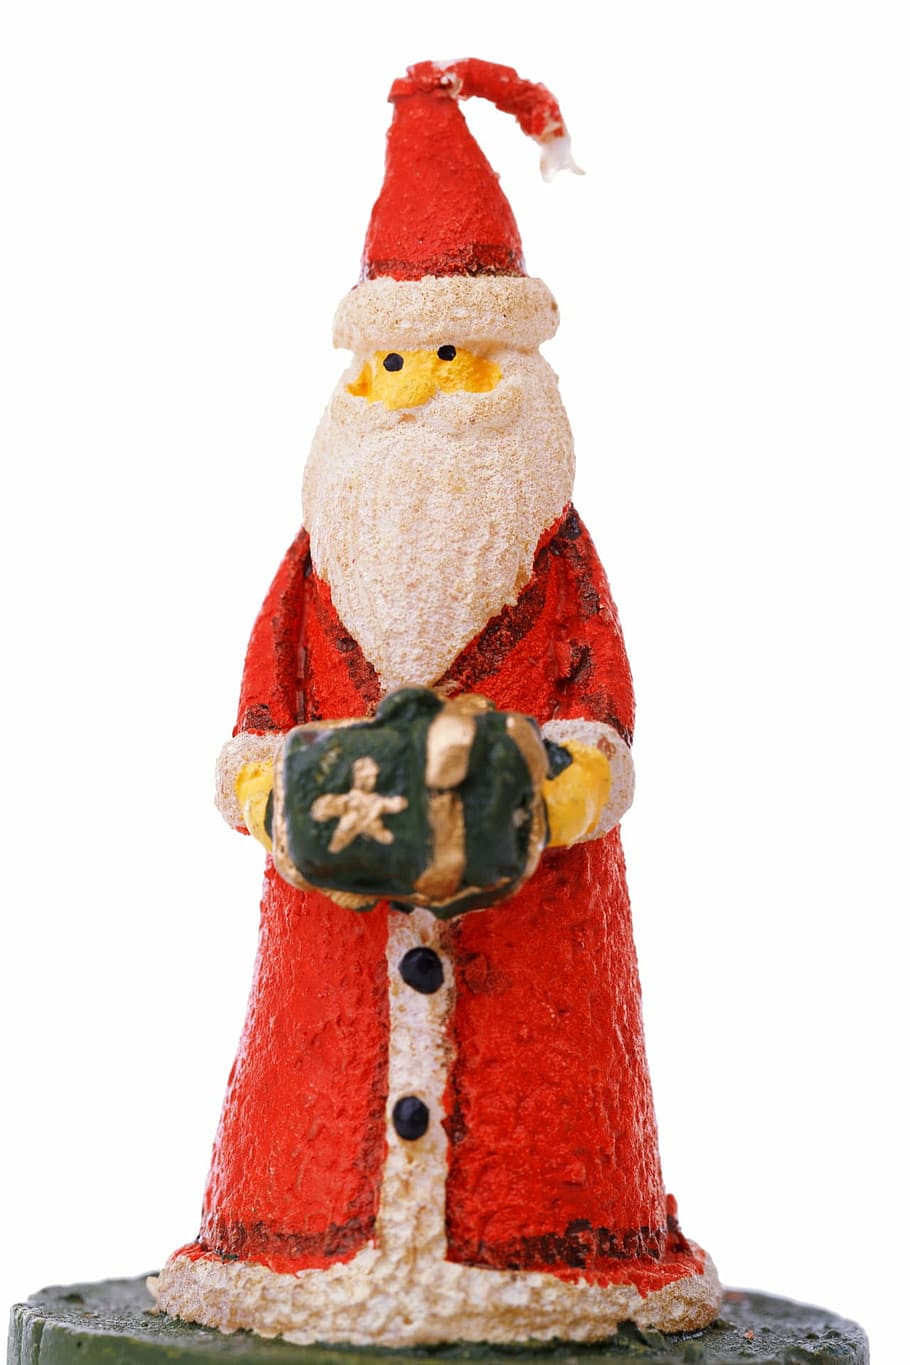 Beard, Candle, Celebration, Christmas, santa claus, decoration, holiday, merry, red, tradition